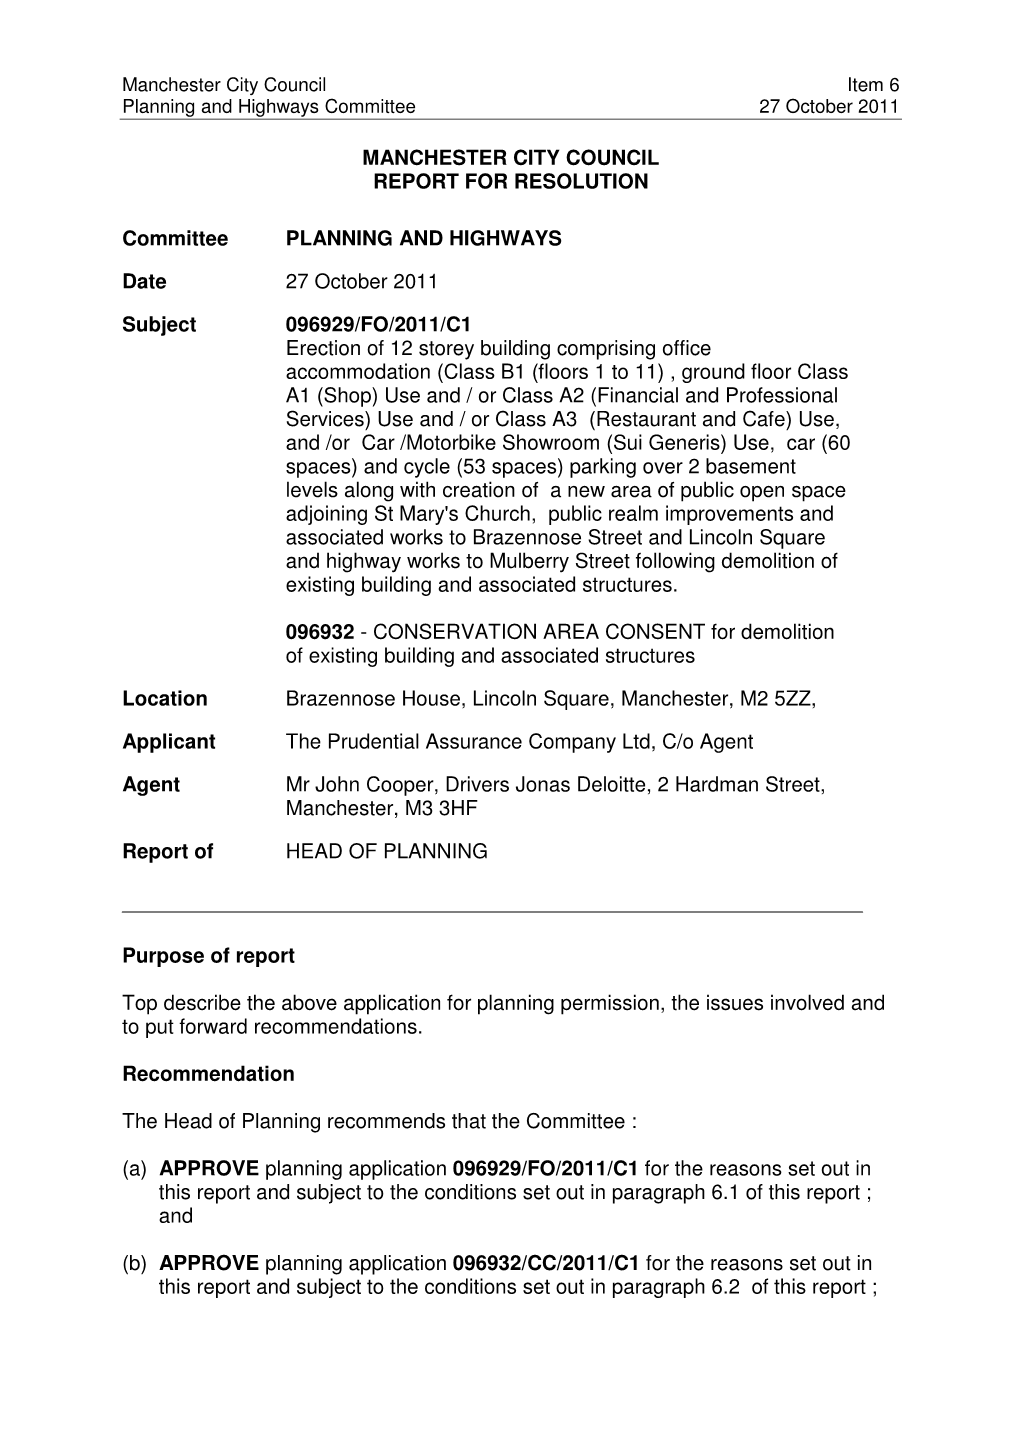 Report to Planning and Highways Committee 27 October 2011 Item 6